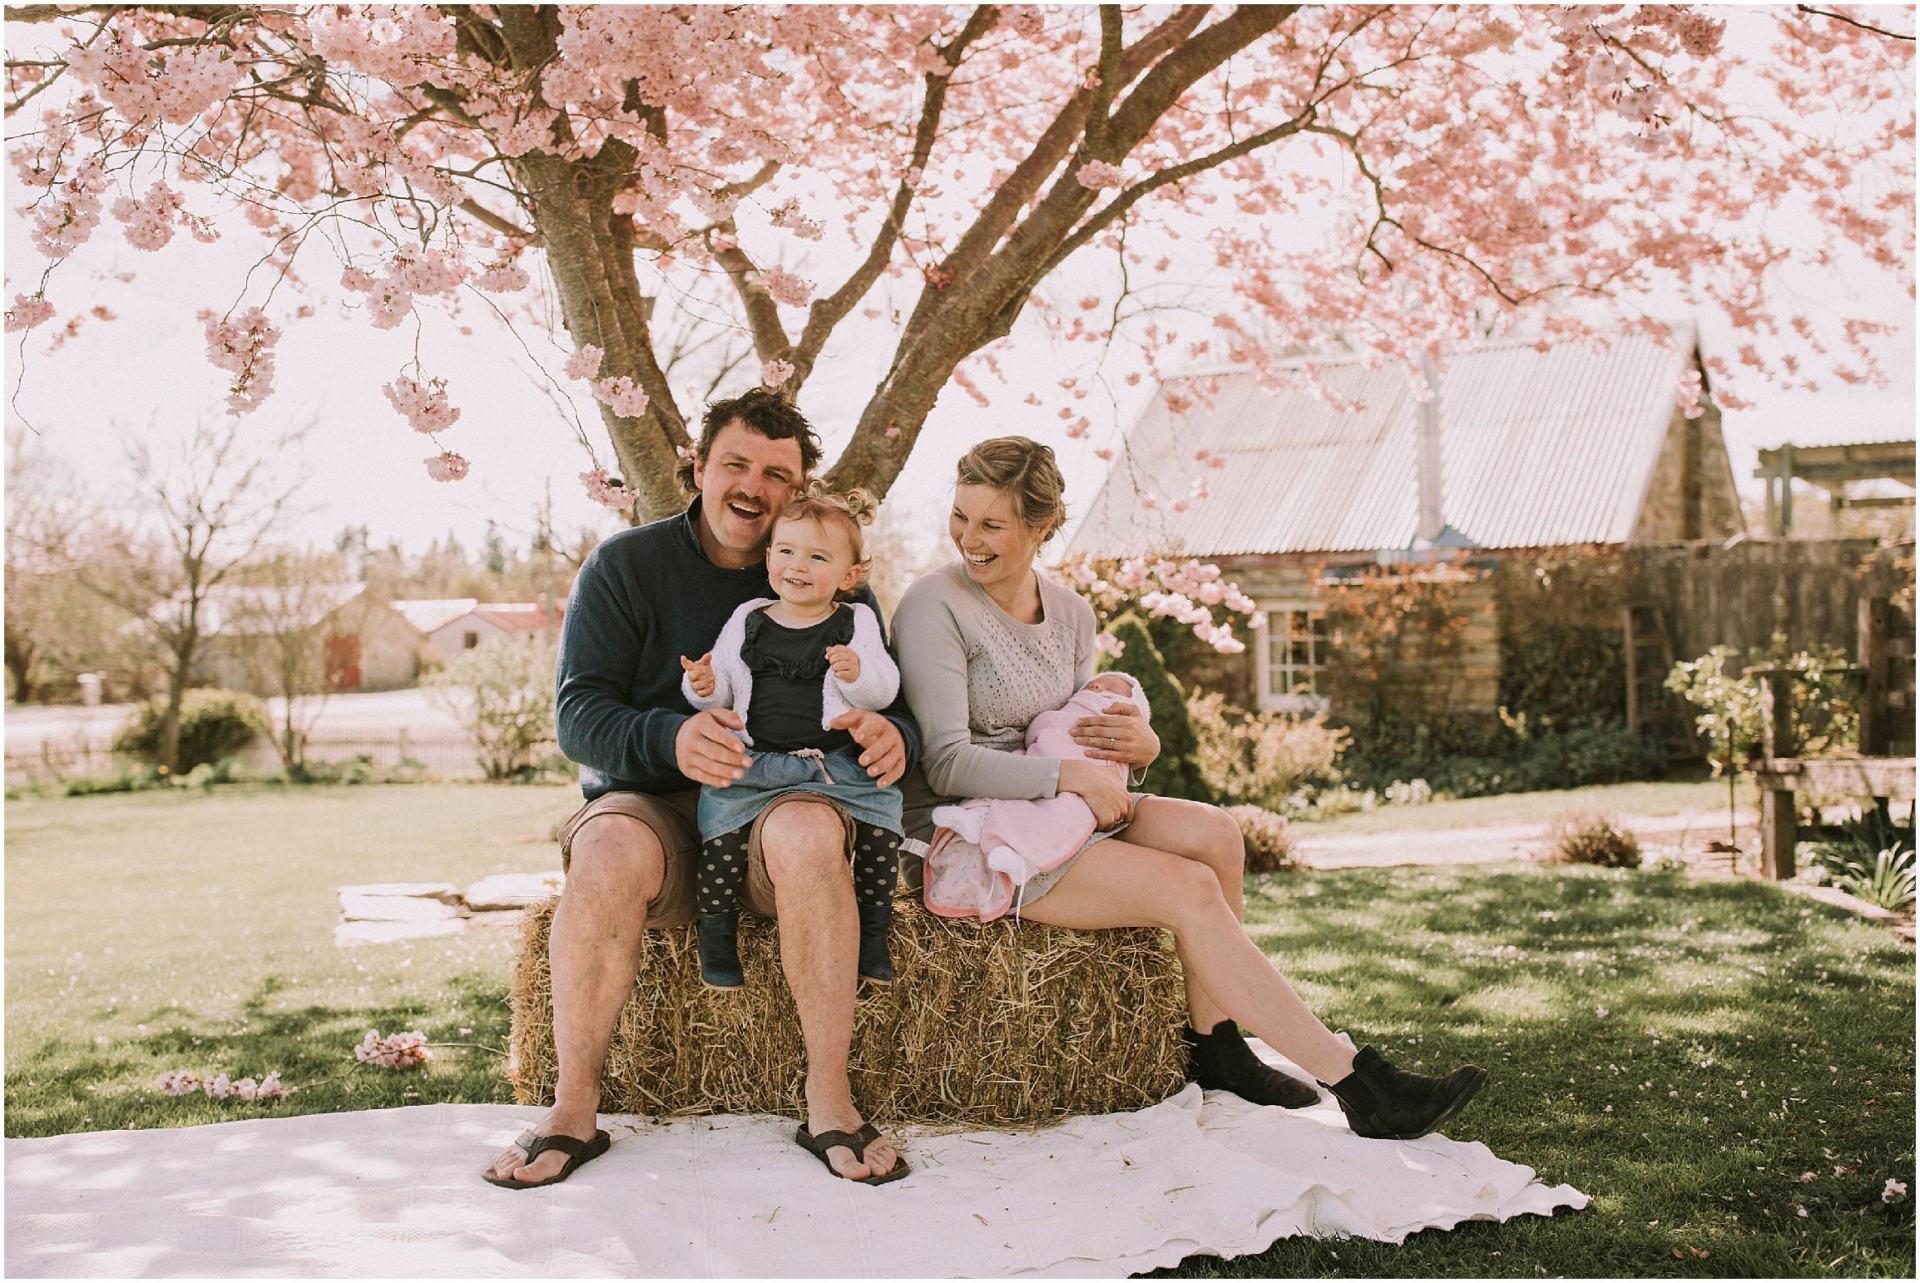 Charlotte Kiri Photography - Family Photography of a mum and dad sitting on a hay bale with their young daughter and baby in front of a pretty cottage and pink blossom tree in Wanaka, New Zealand.